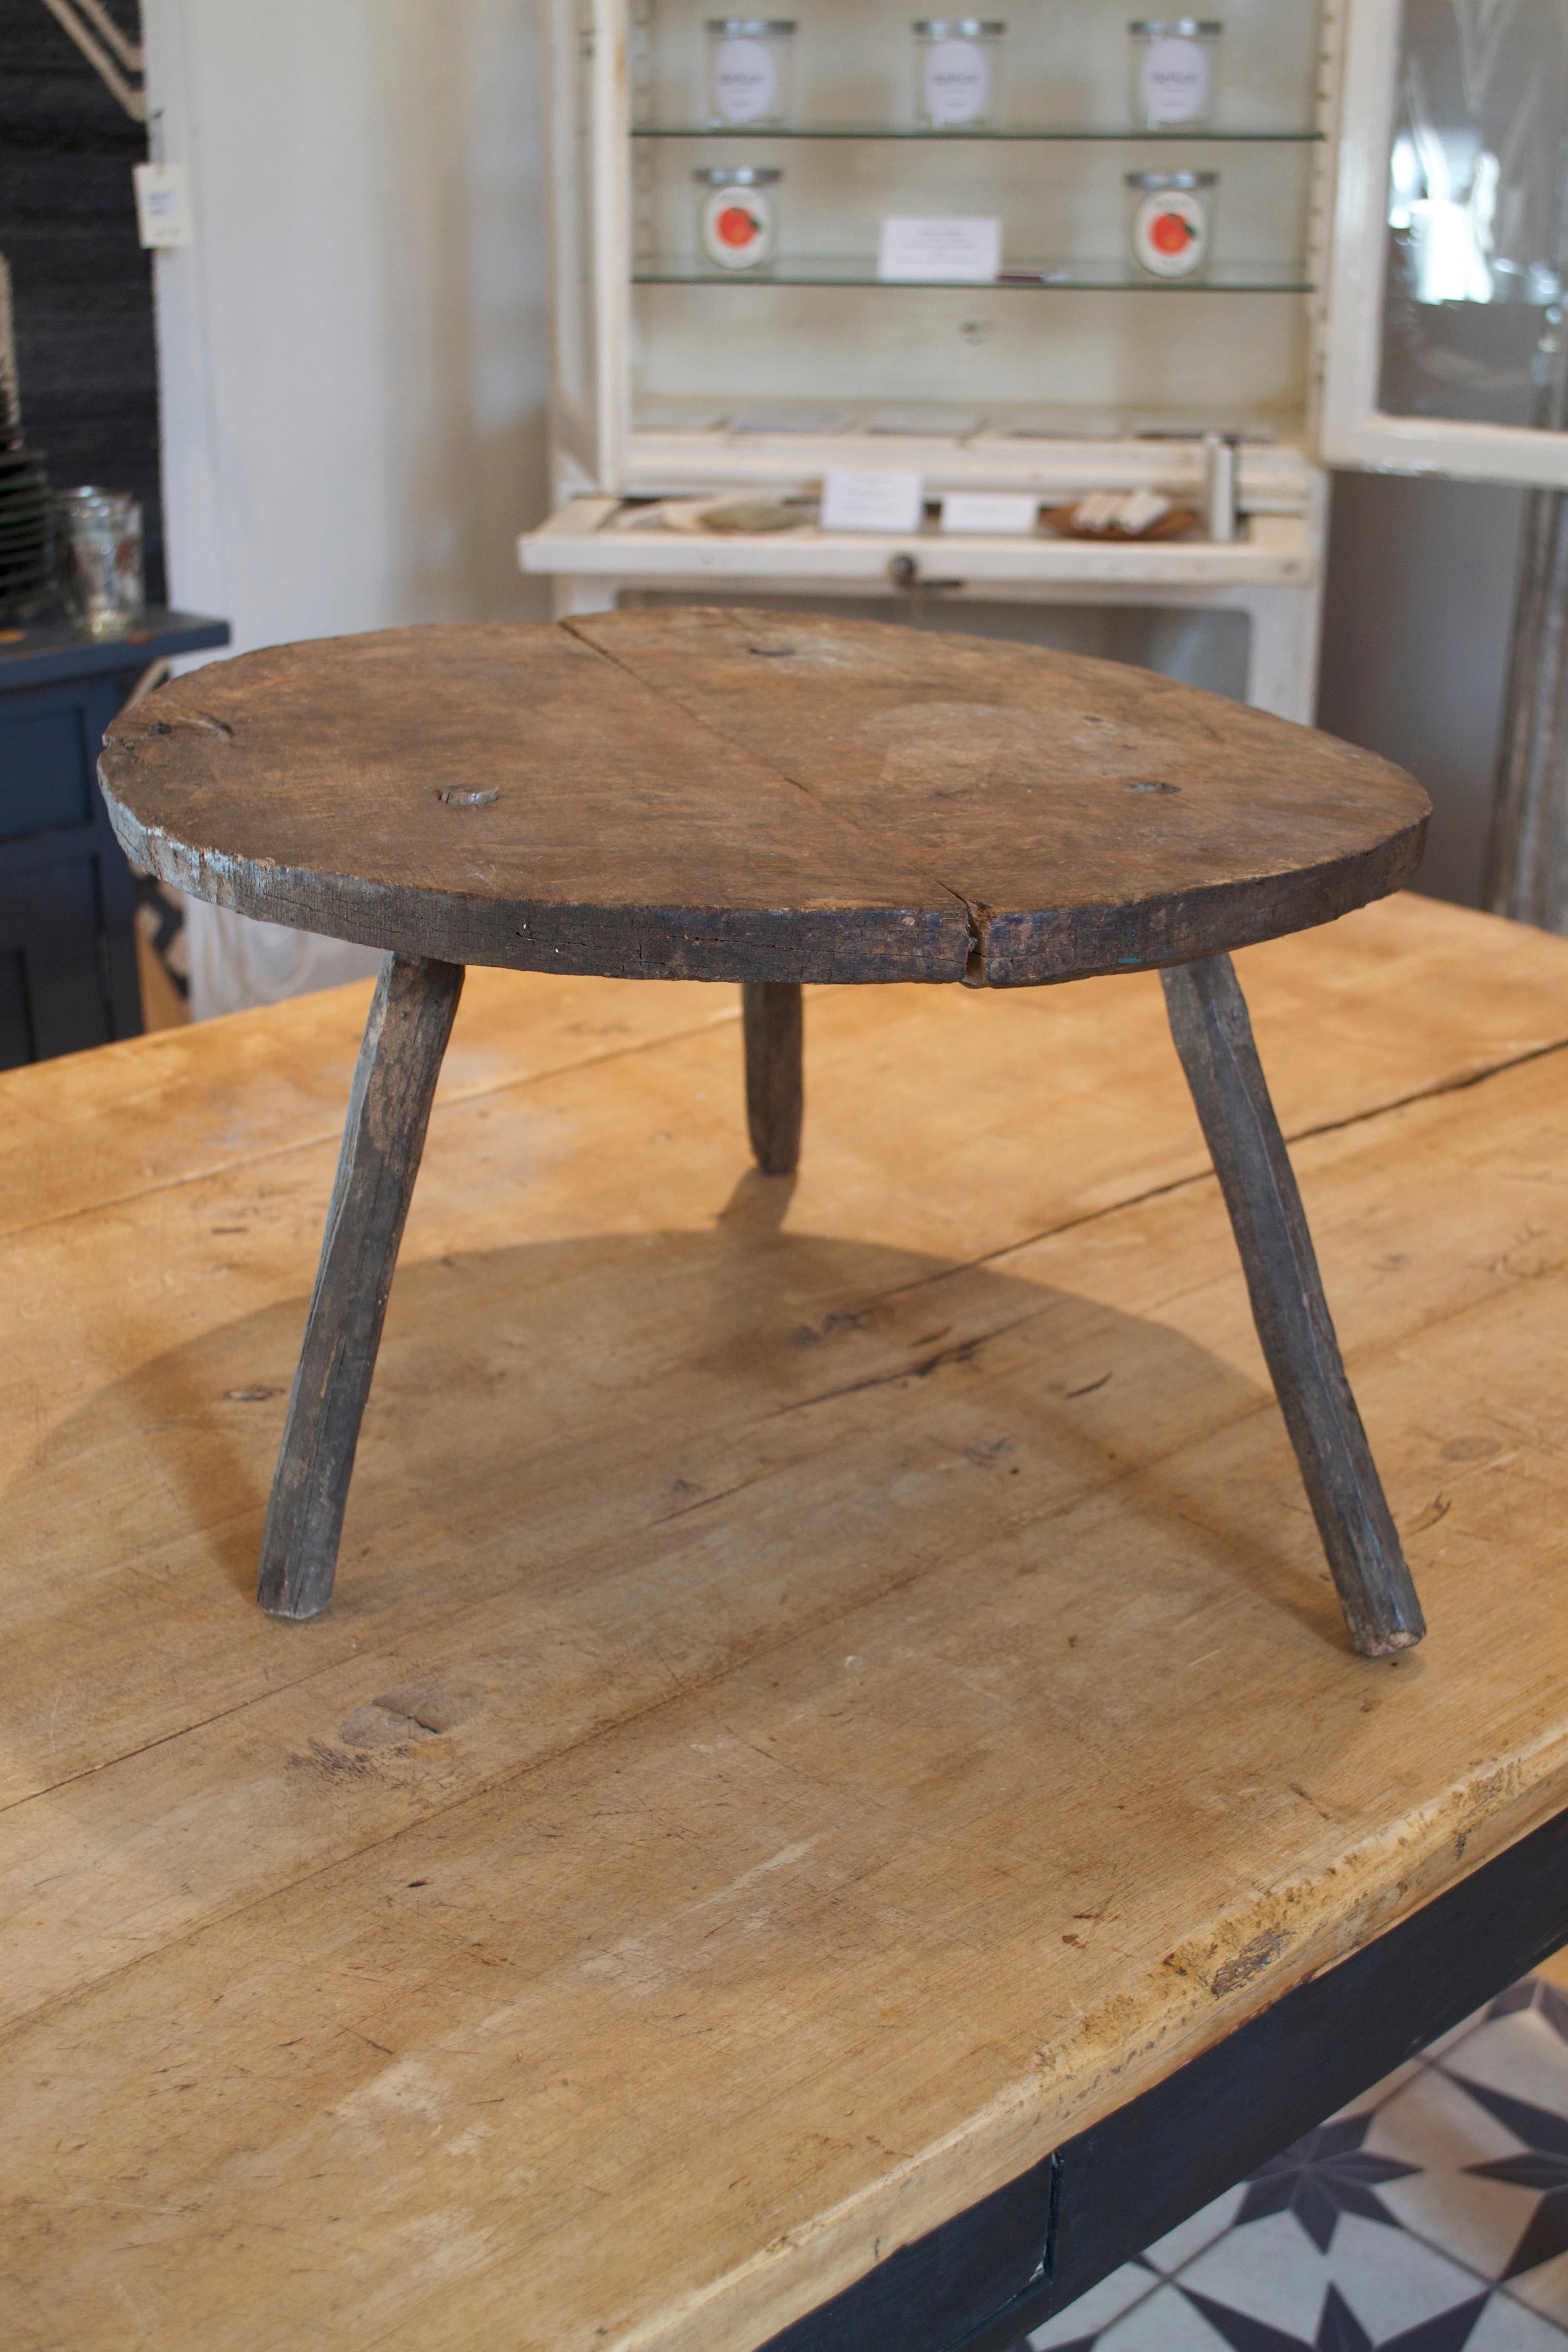 A rustic handmade French side table. Low to the ground with characteristics of handmade craft and age.